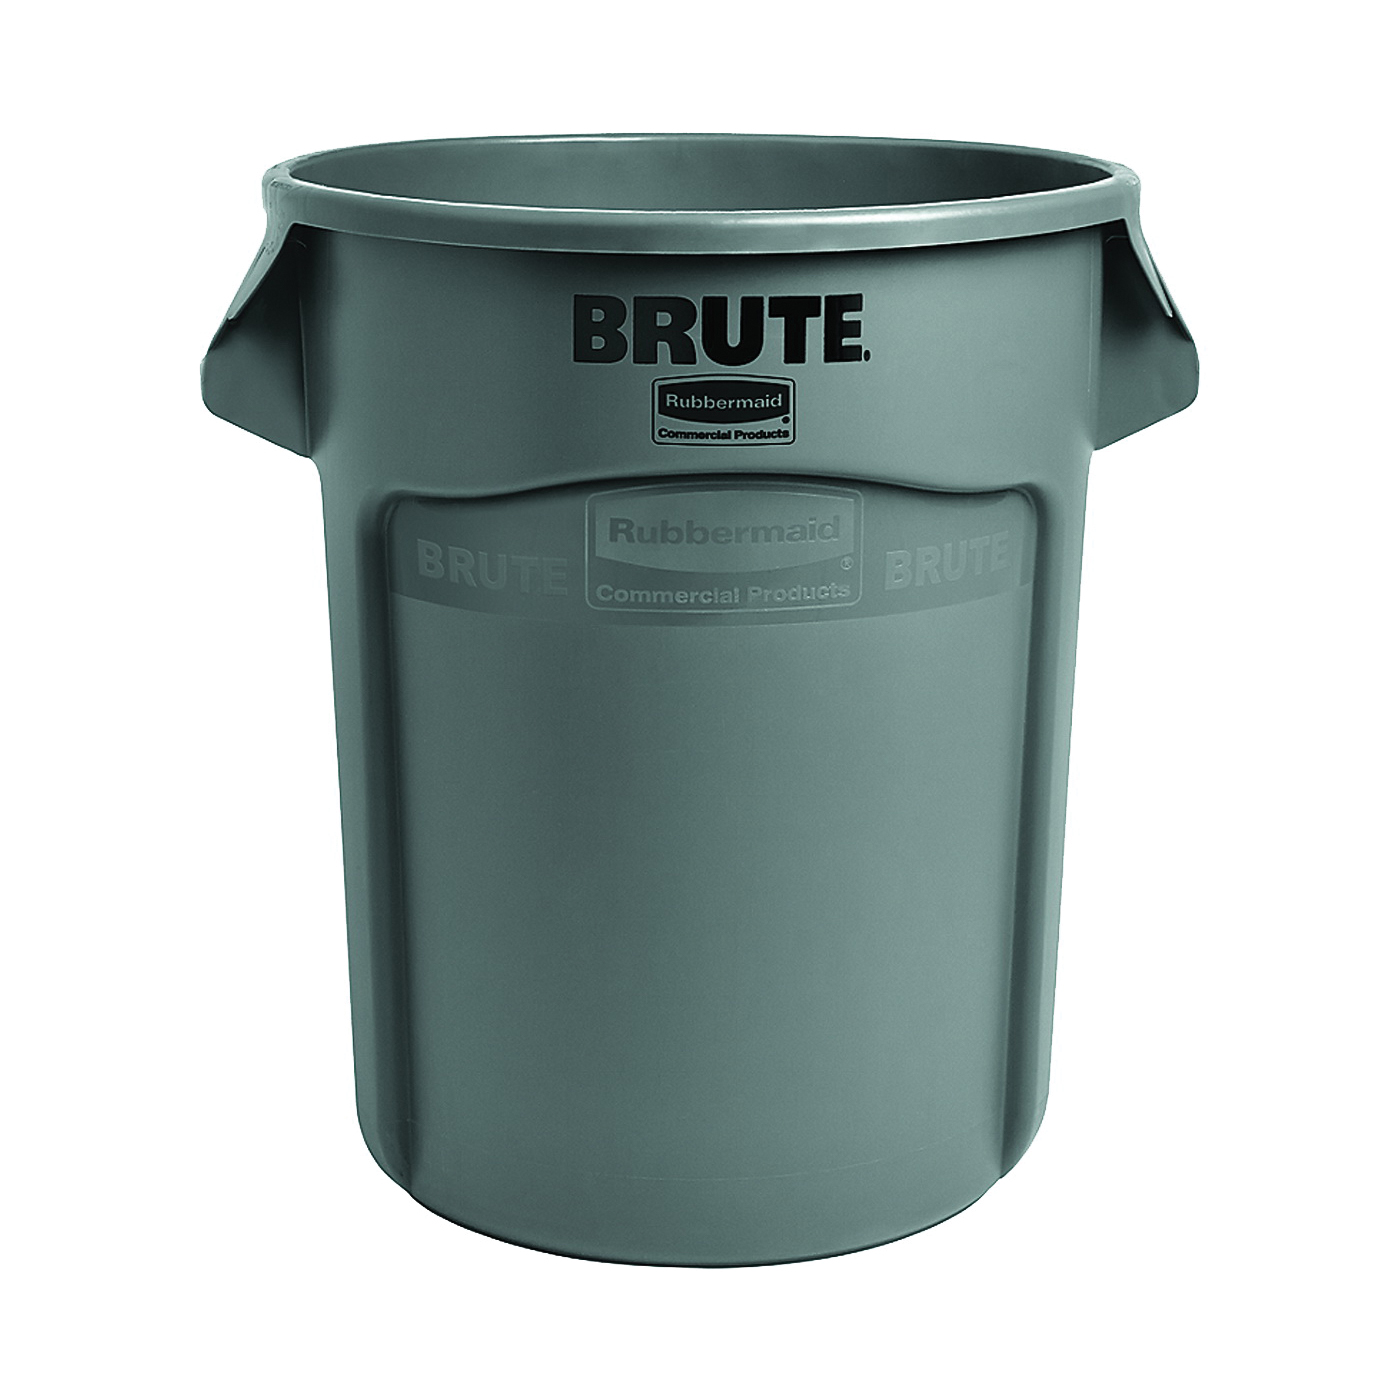 Rubbermaid 262016GRAY Trash Container, 20 gal Capacity, Plastic, Gray - 1